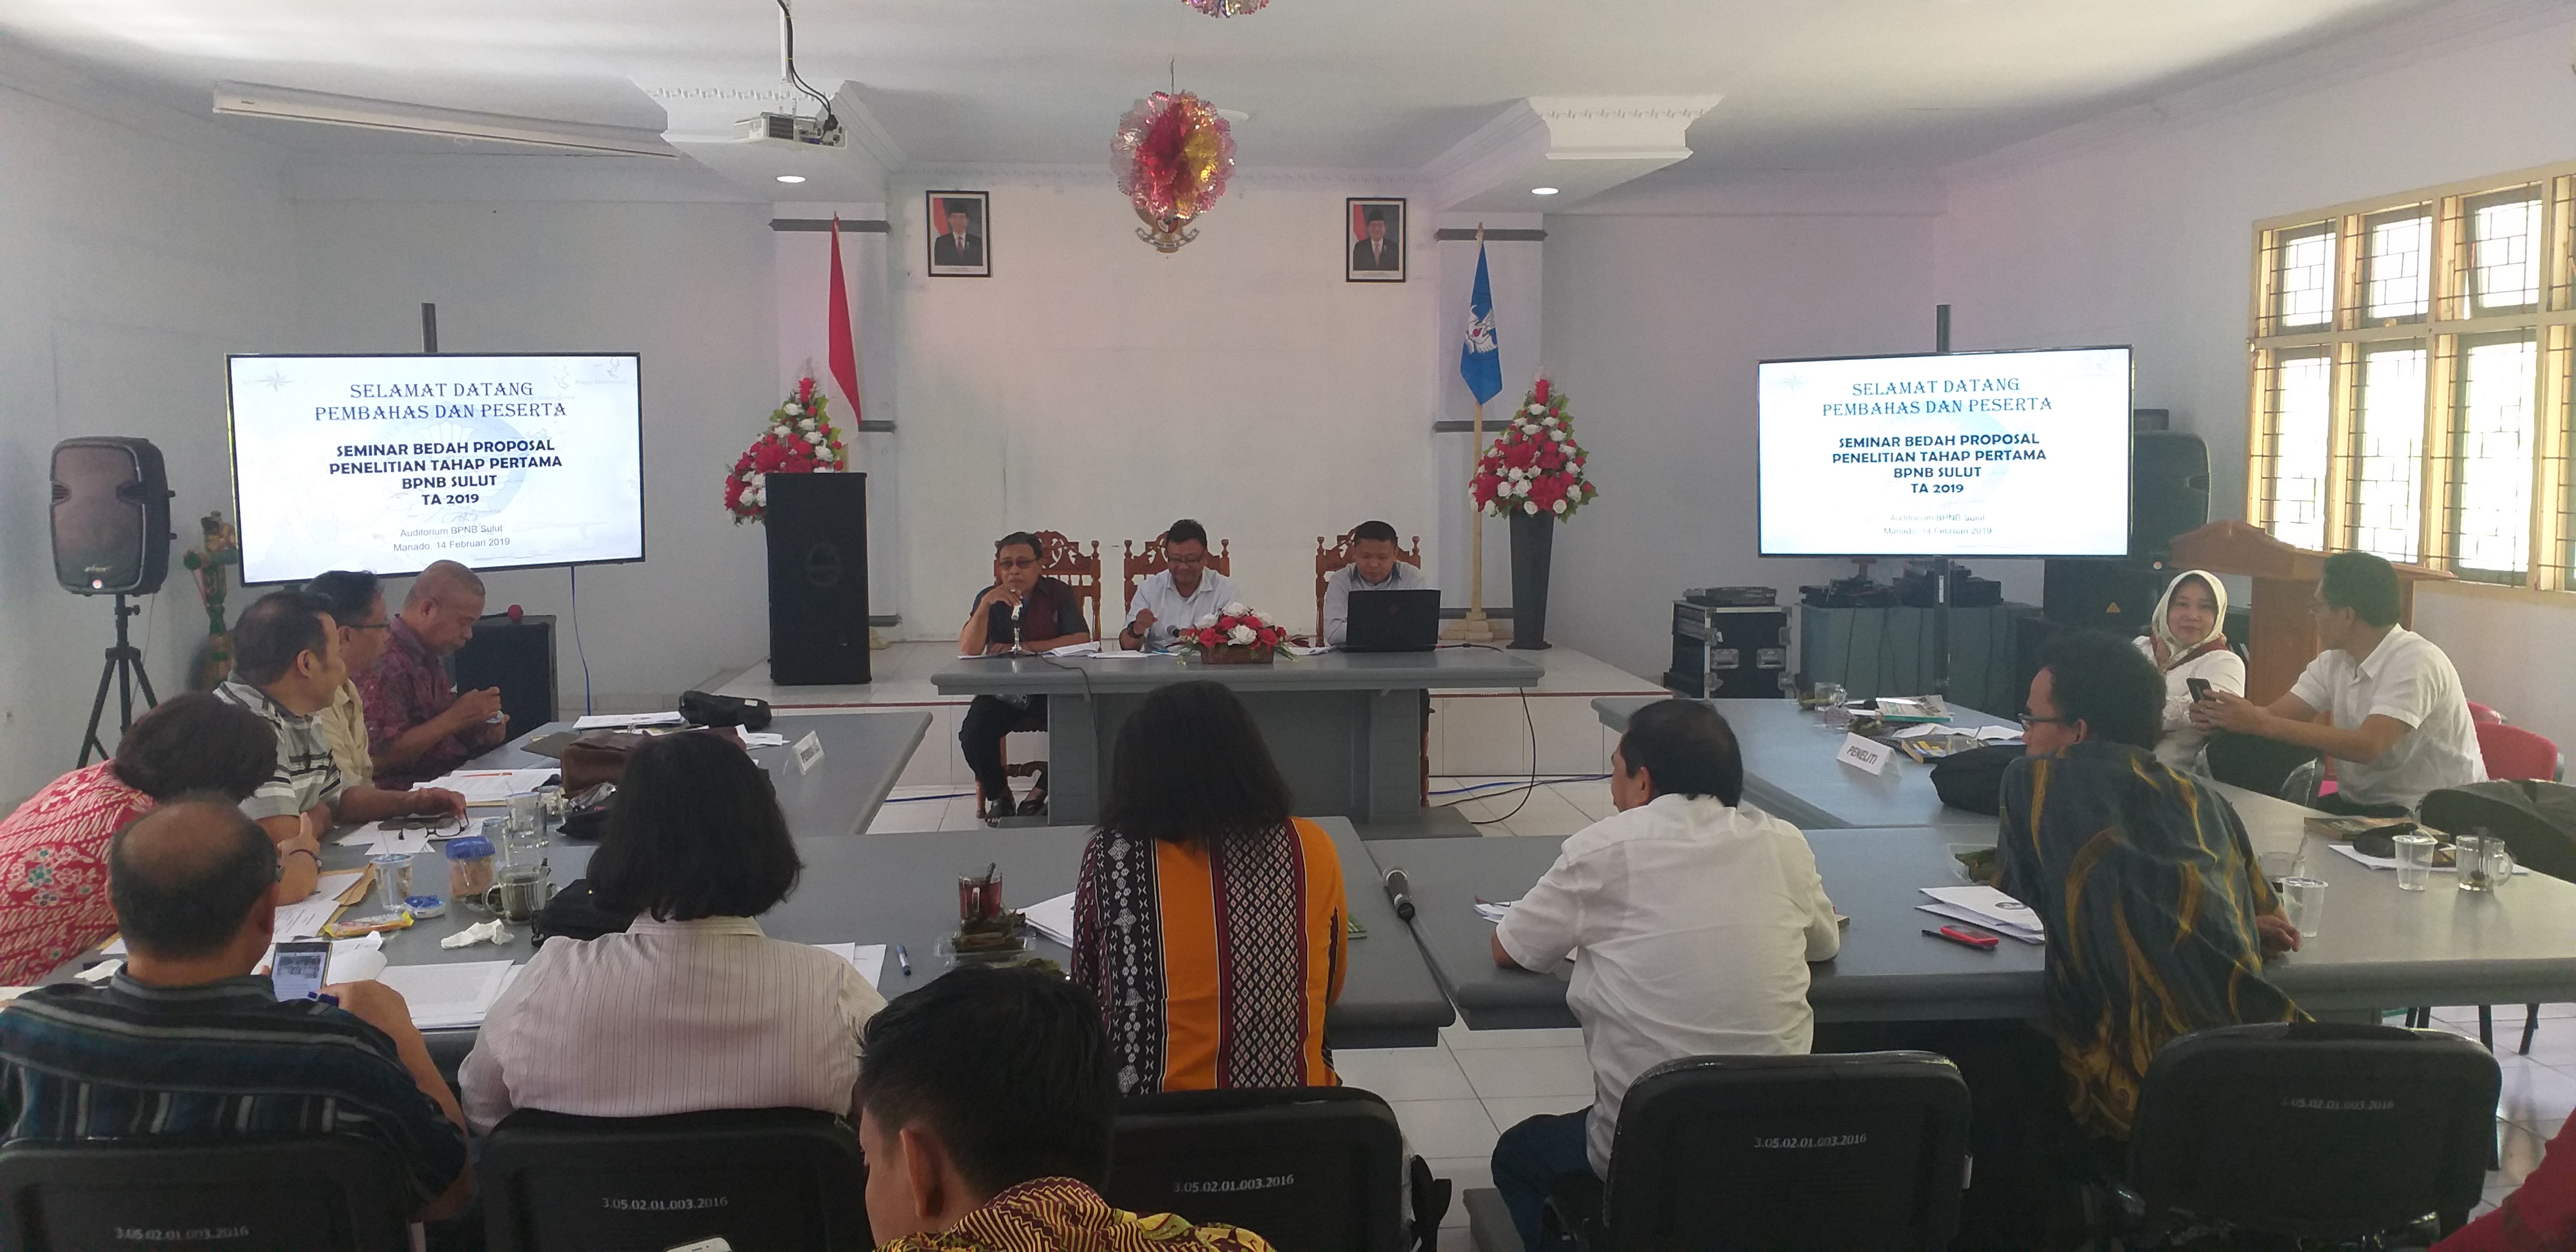 You are currently viewing Seminar Proposal Penelitian 2019 BPNB Sulut